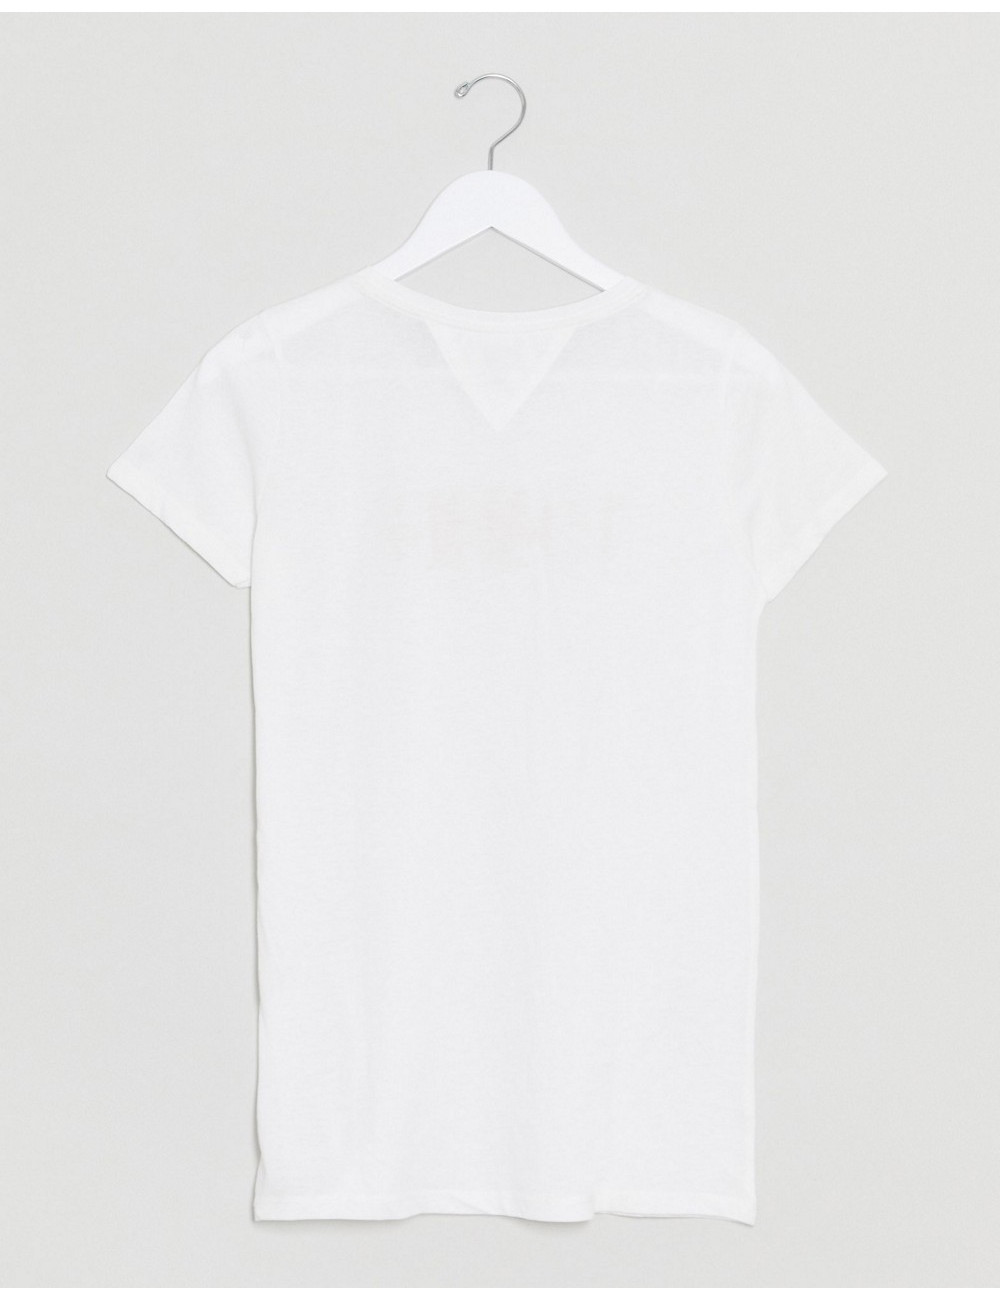 Tommy Jeans t-shirt in white